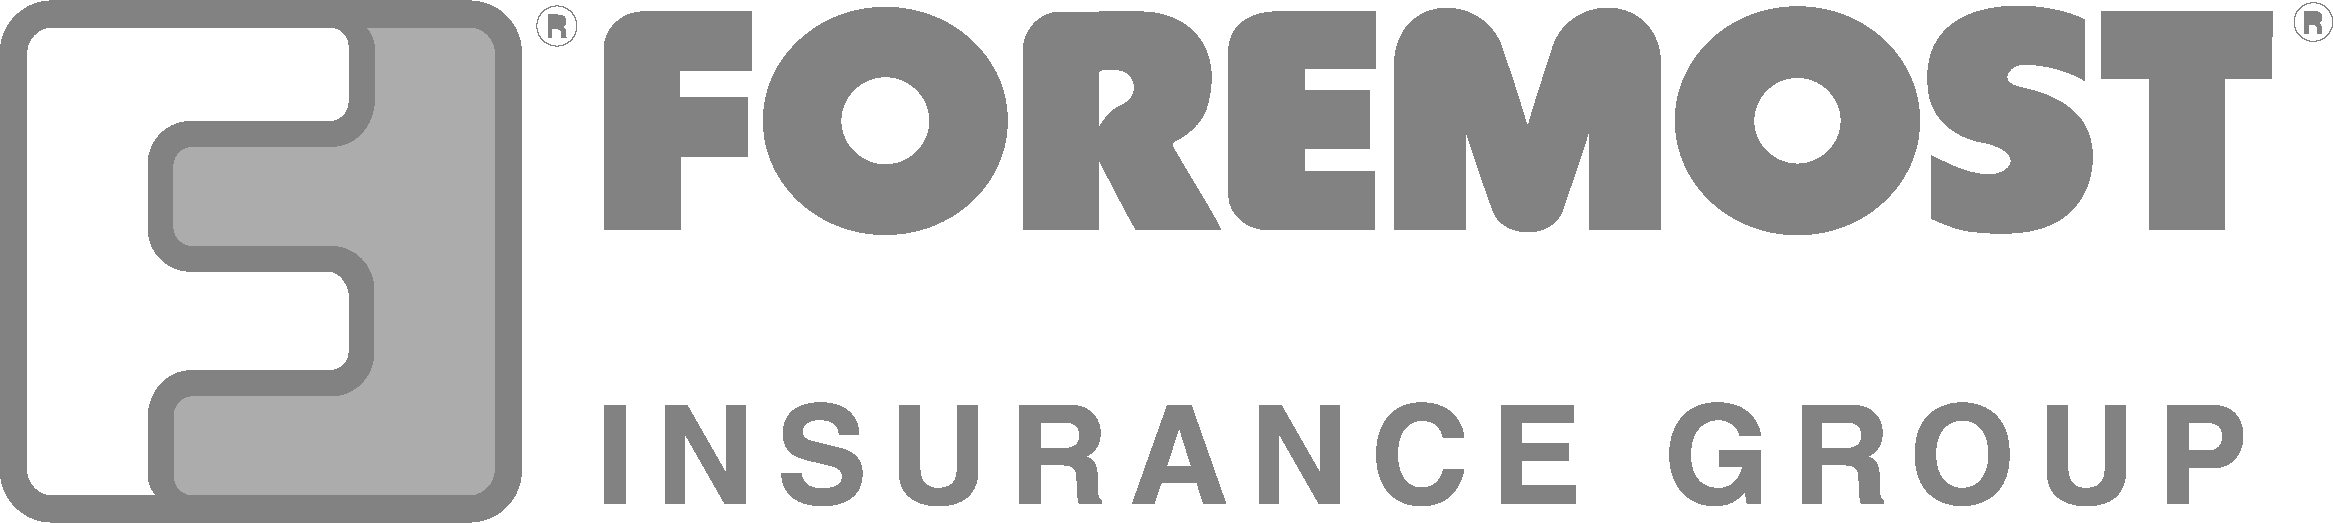 Foremost Insurance Group Logo PNG